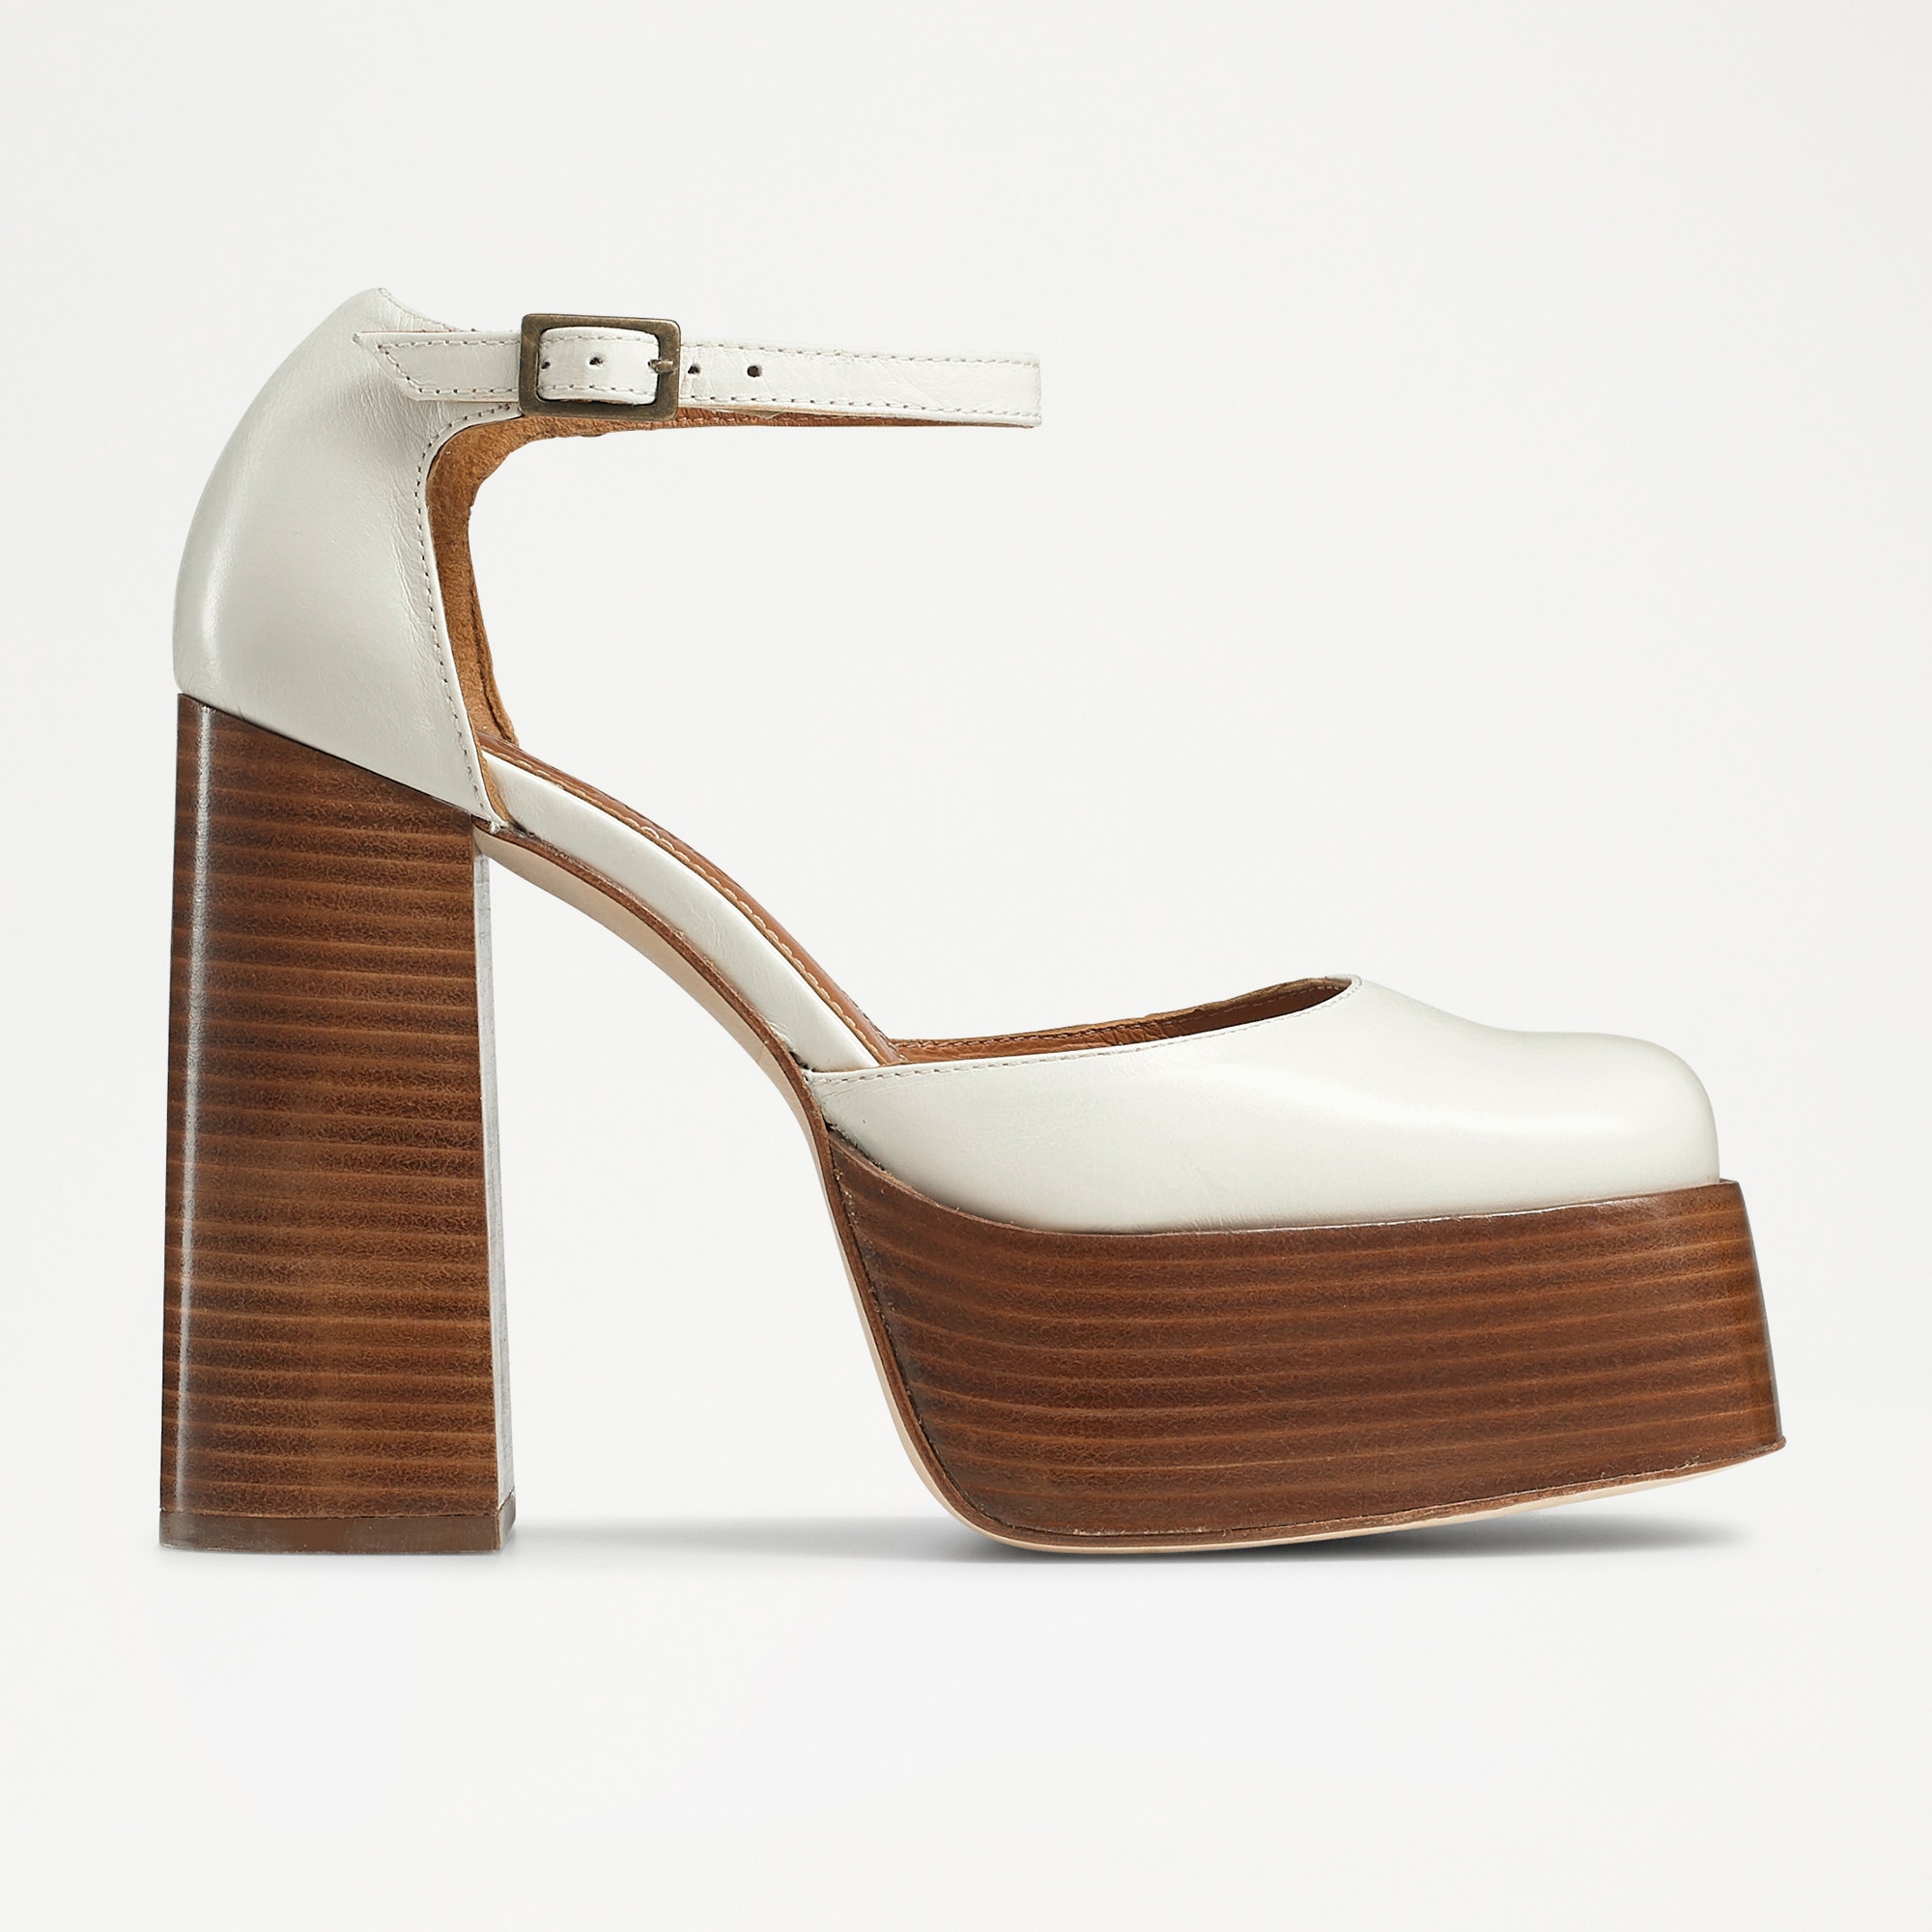 Russell & Bromley Women's White Calf Leather BLONDIE Stacked Heel Platform Sandals, Size: UK 5